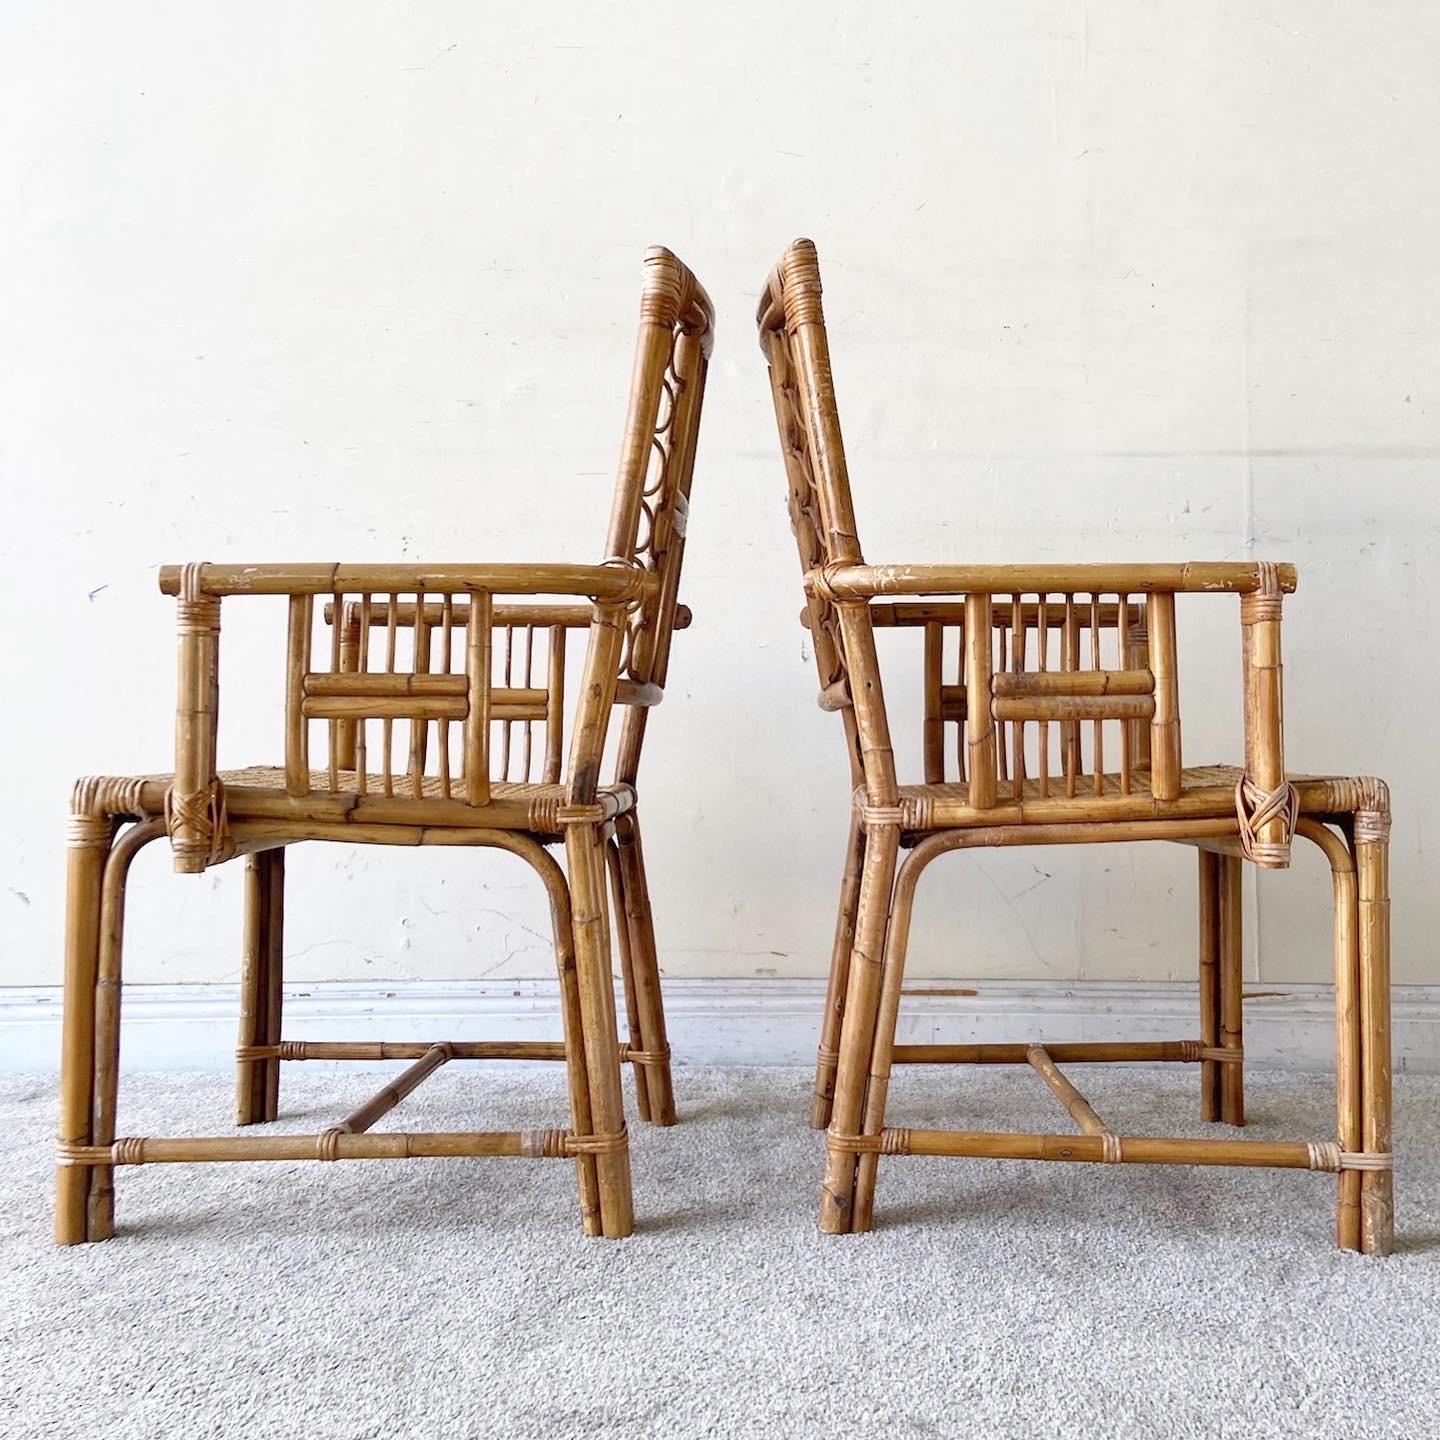 Late 20th Century 1980s, Boho Chic Bamboo Rattan and Cane Dining Chairs Attributed to Brighton